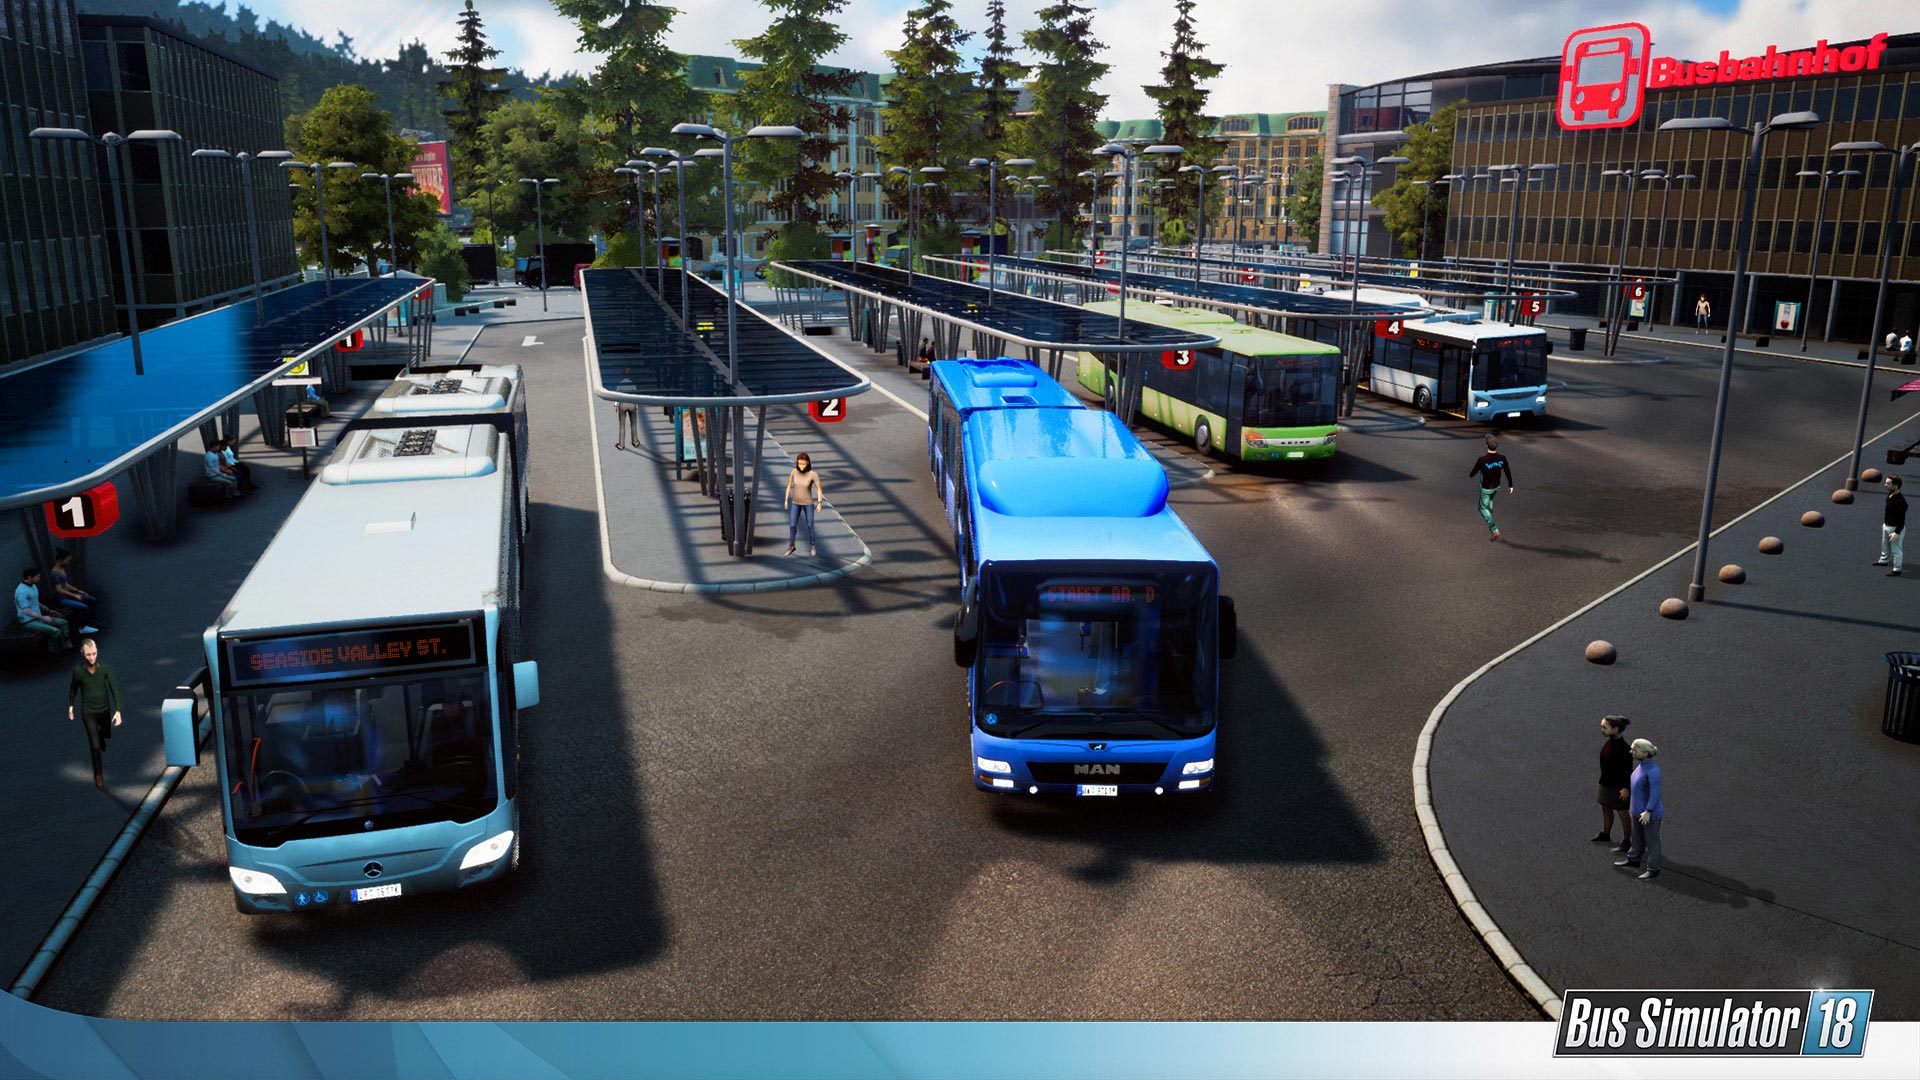 How many bus stops are in bus simulator 18?